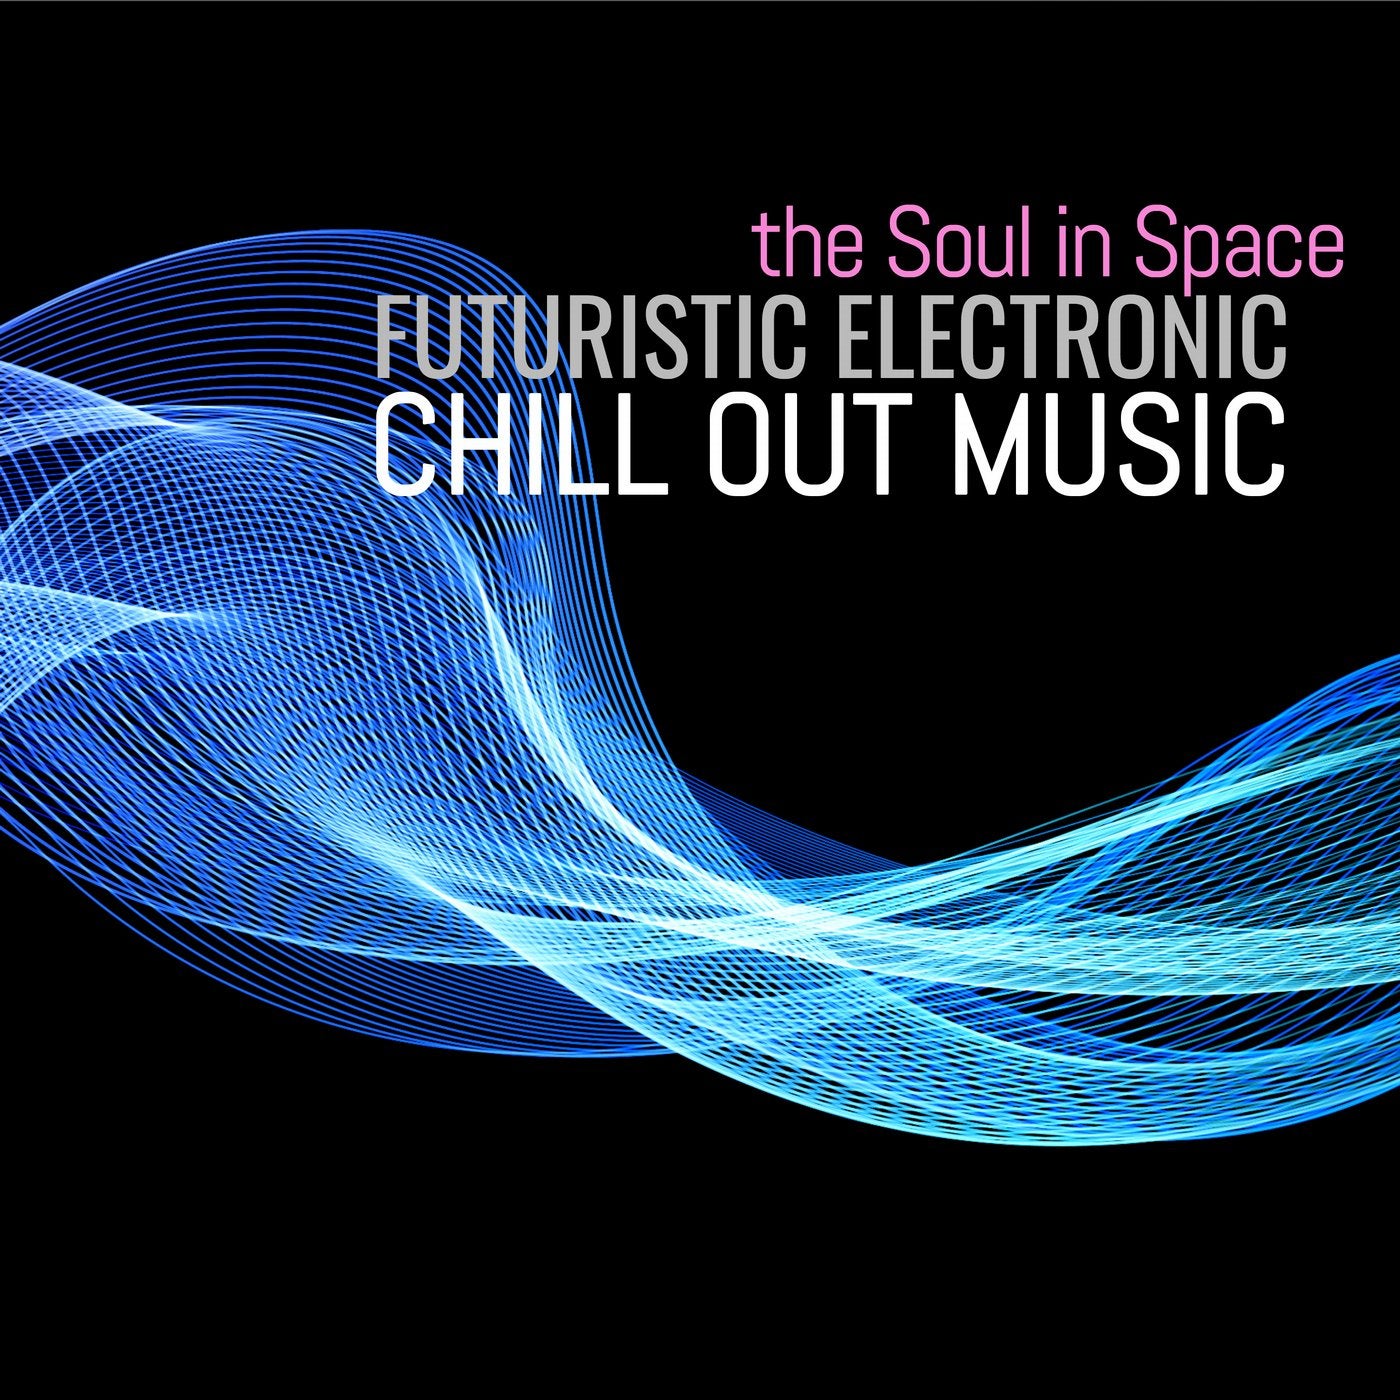 The Soul in Space: Futuristic Electronic Chill Out Music